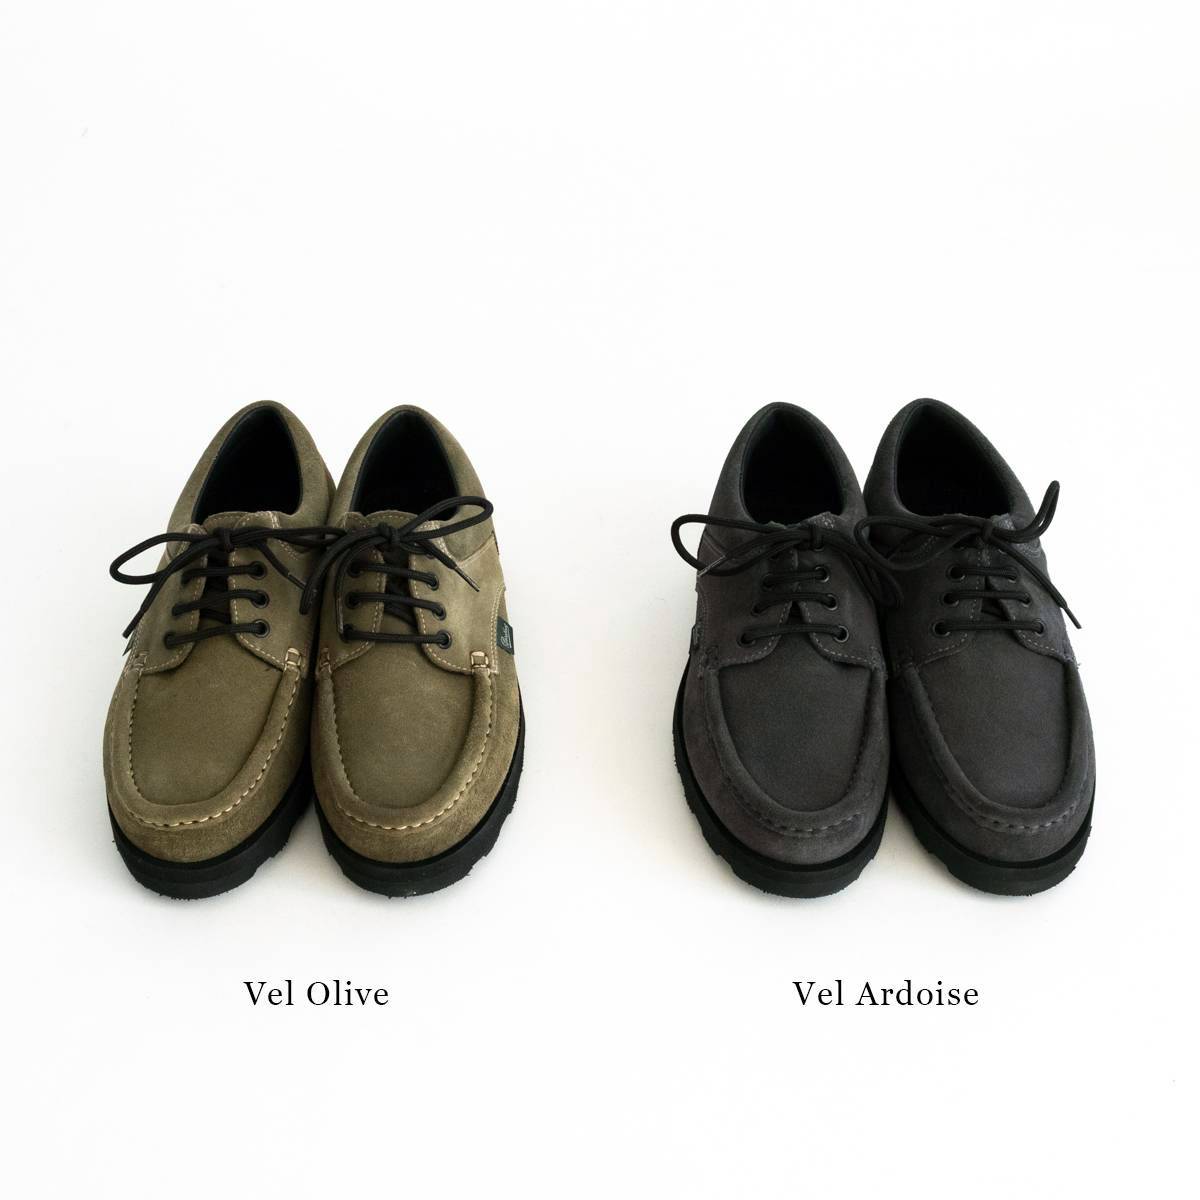 Paraboot THIERS(Vel Olive) | Paraboot (パラブーツ) - 通販 - FEEL 